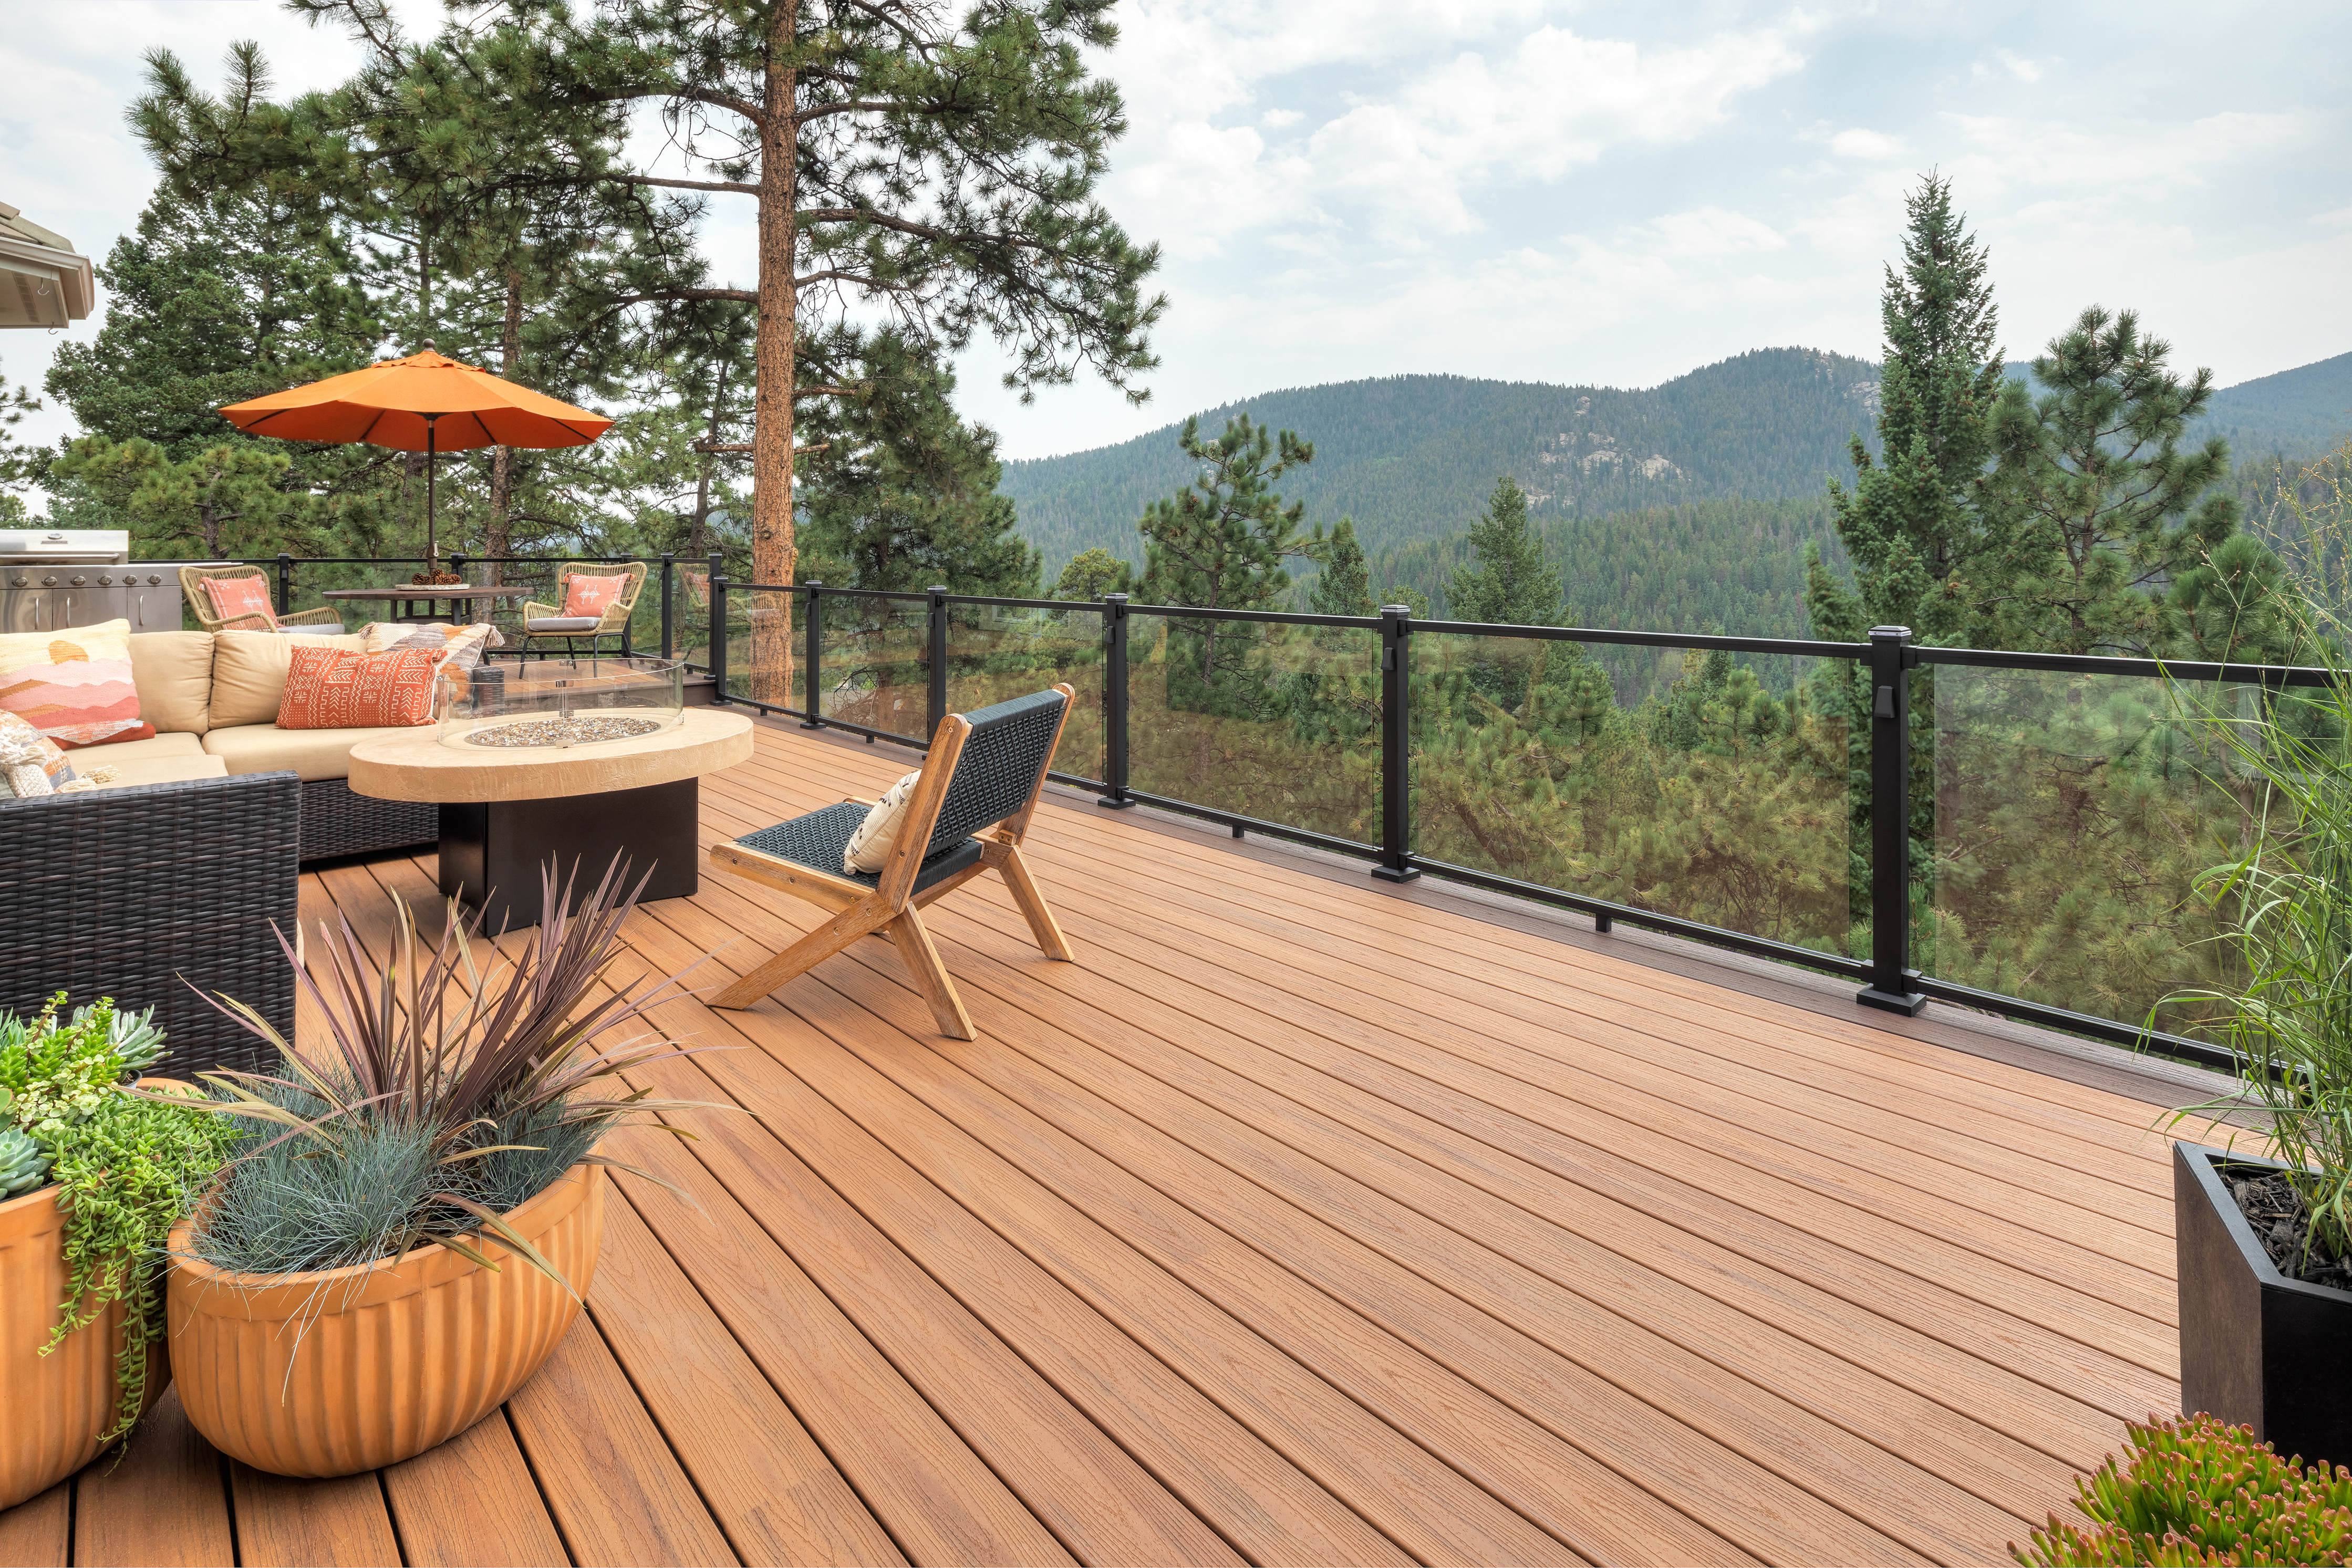 https://www.trex.com/content/dam/trex/images/products/residential/railing/signature/beauty/glass/trn-colorado-008-tt-sig-glass-railing-chair-mountains.jpg